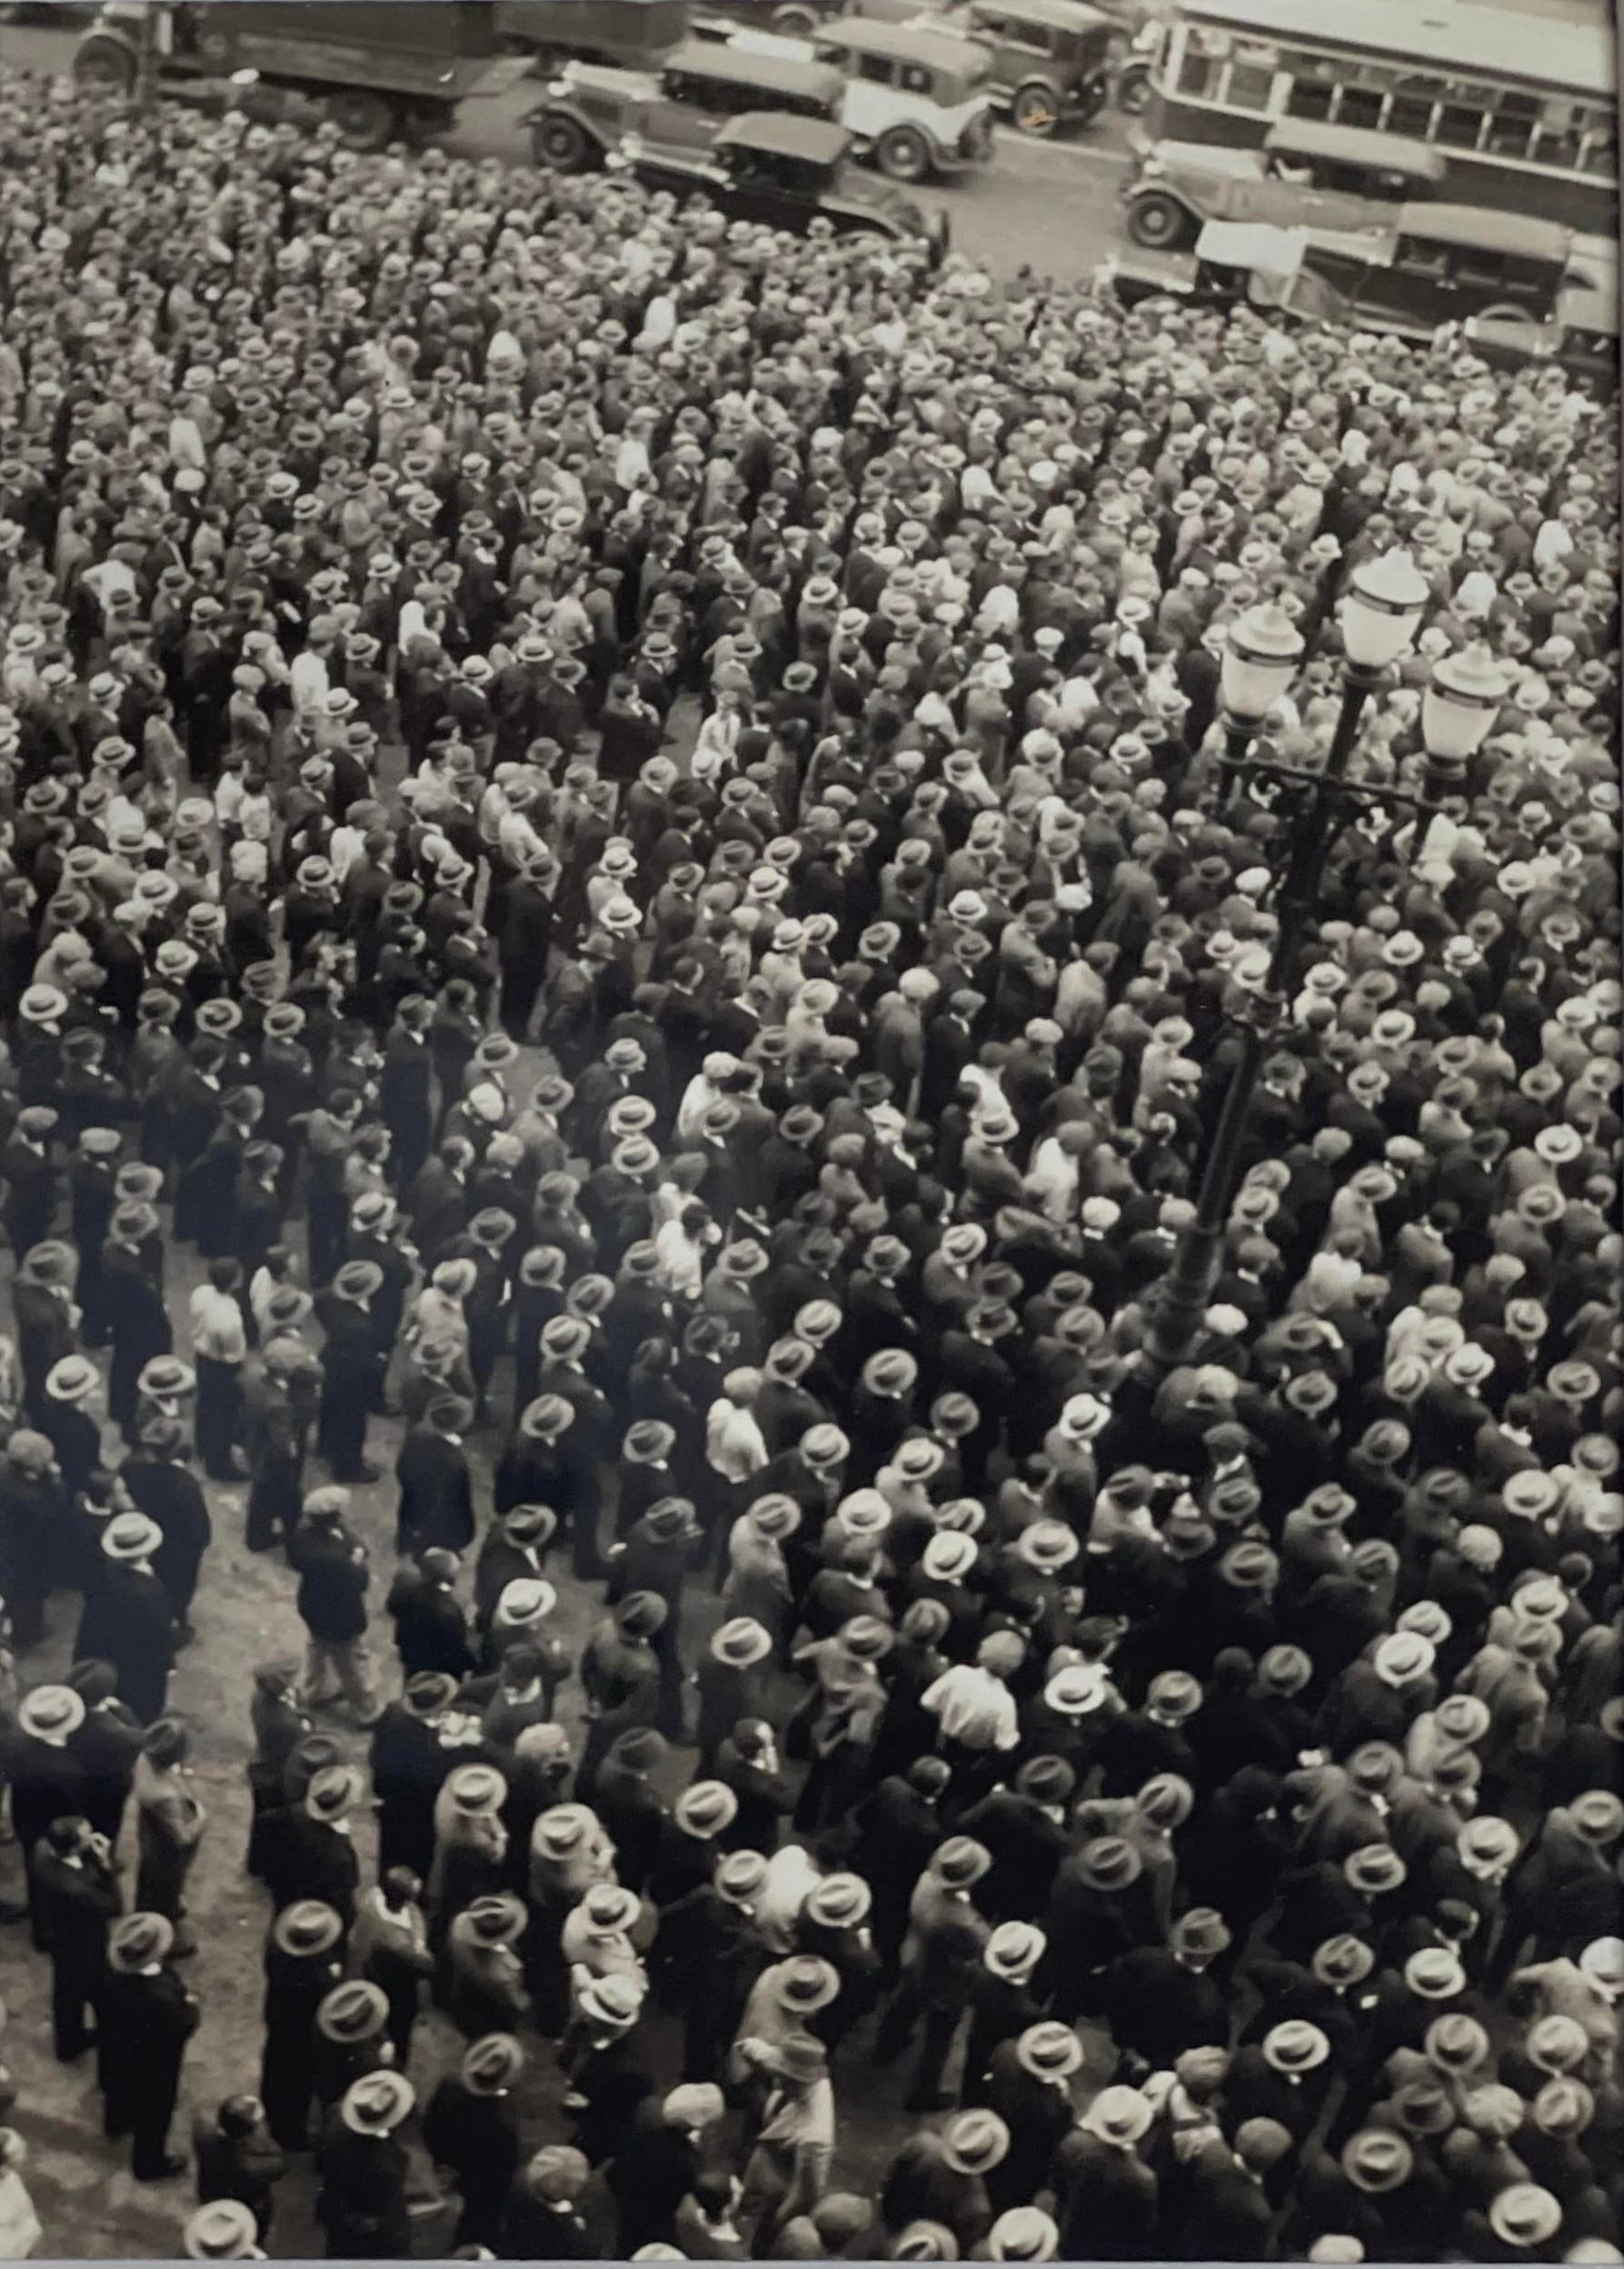 Edward W. Quigley Black and White Photograph - Crowd Scene